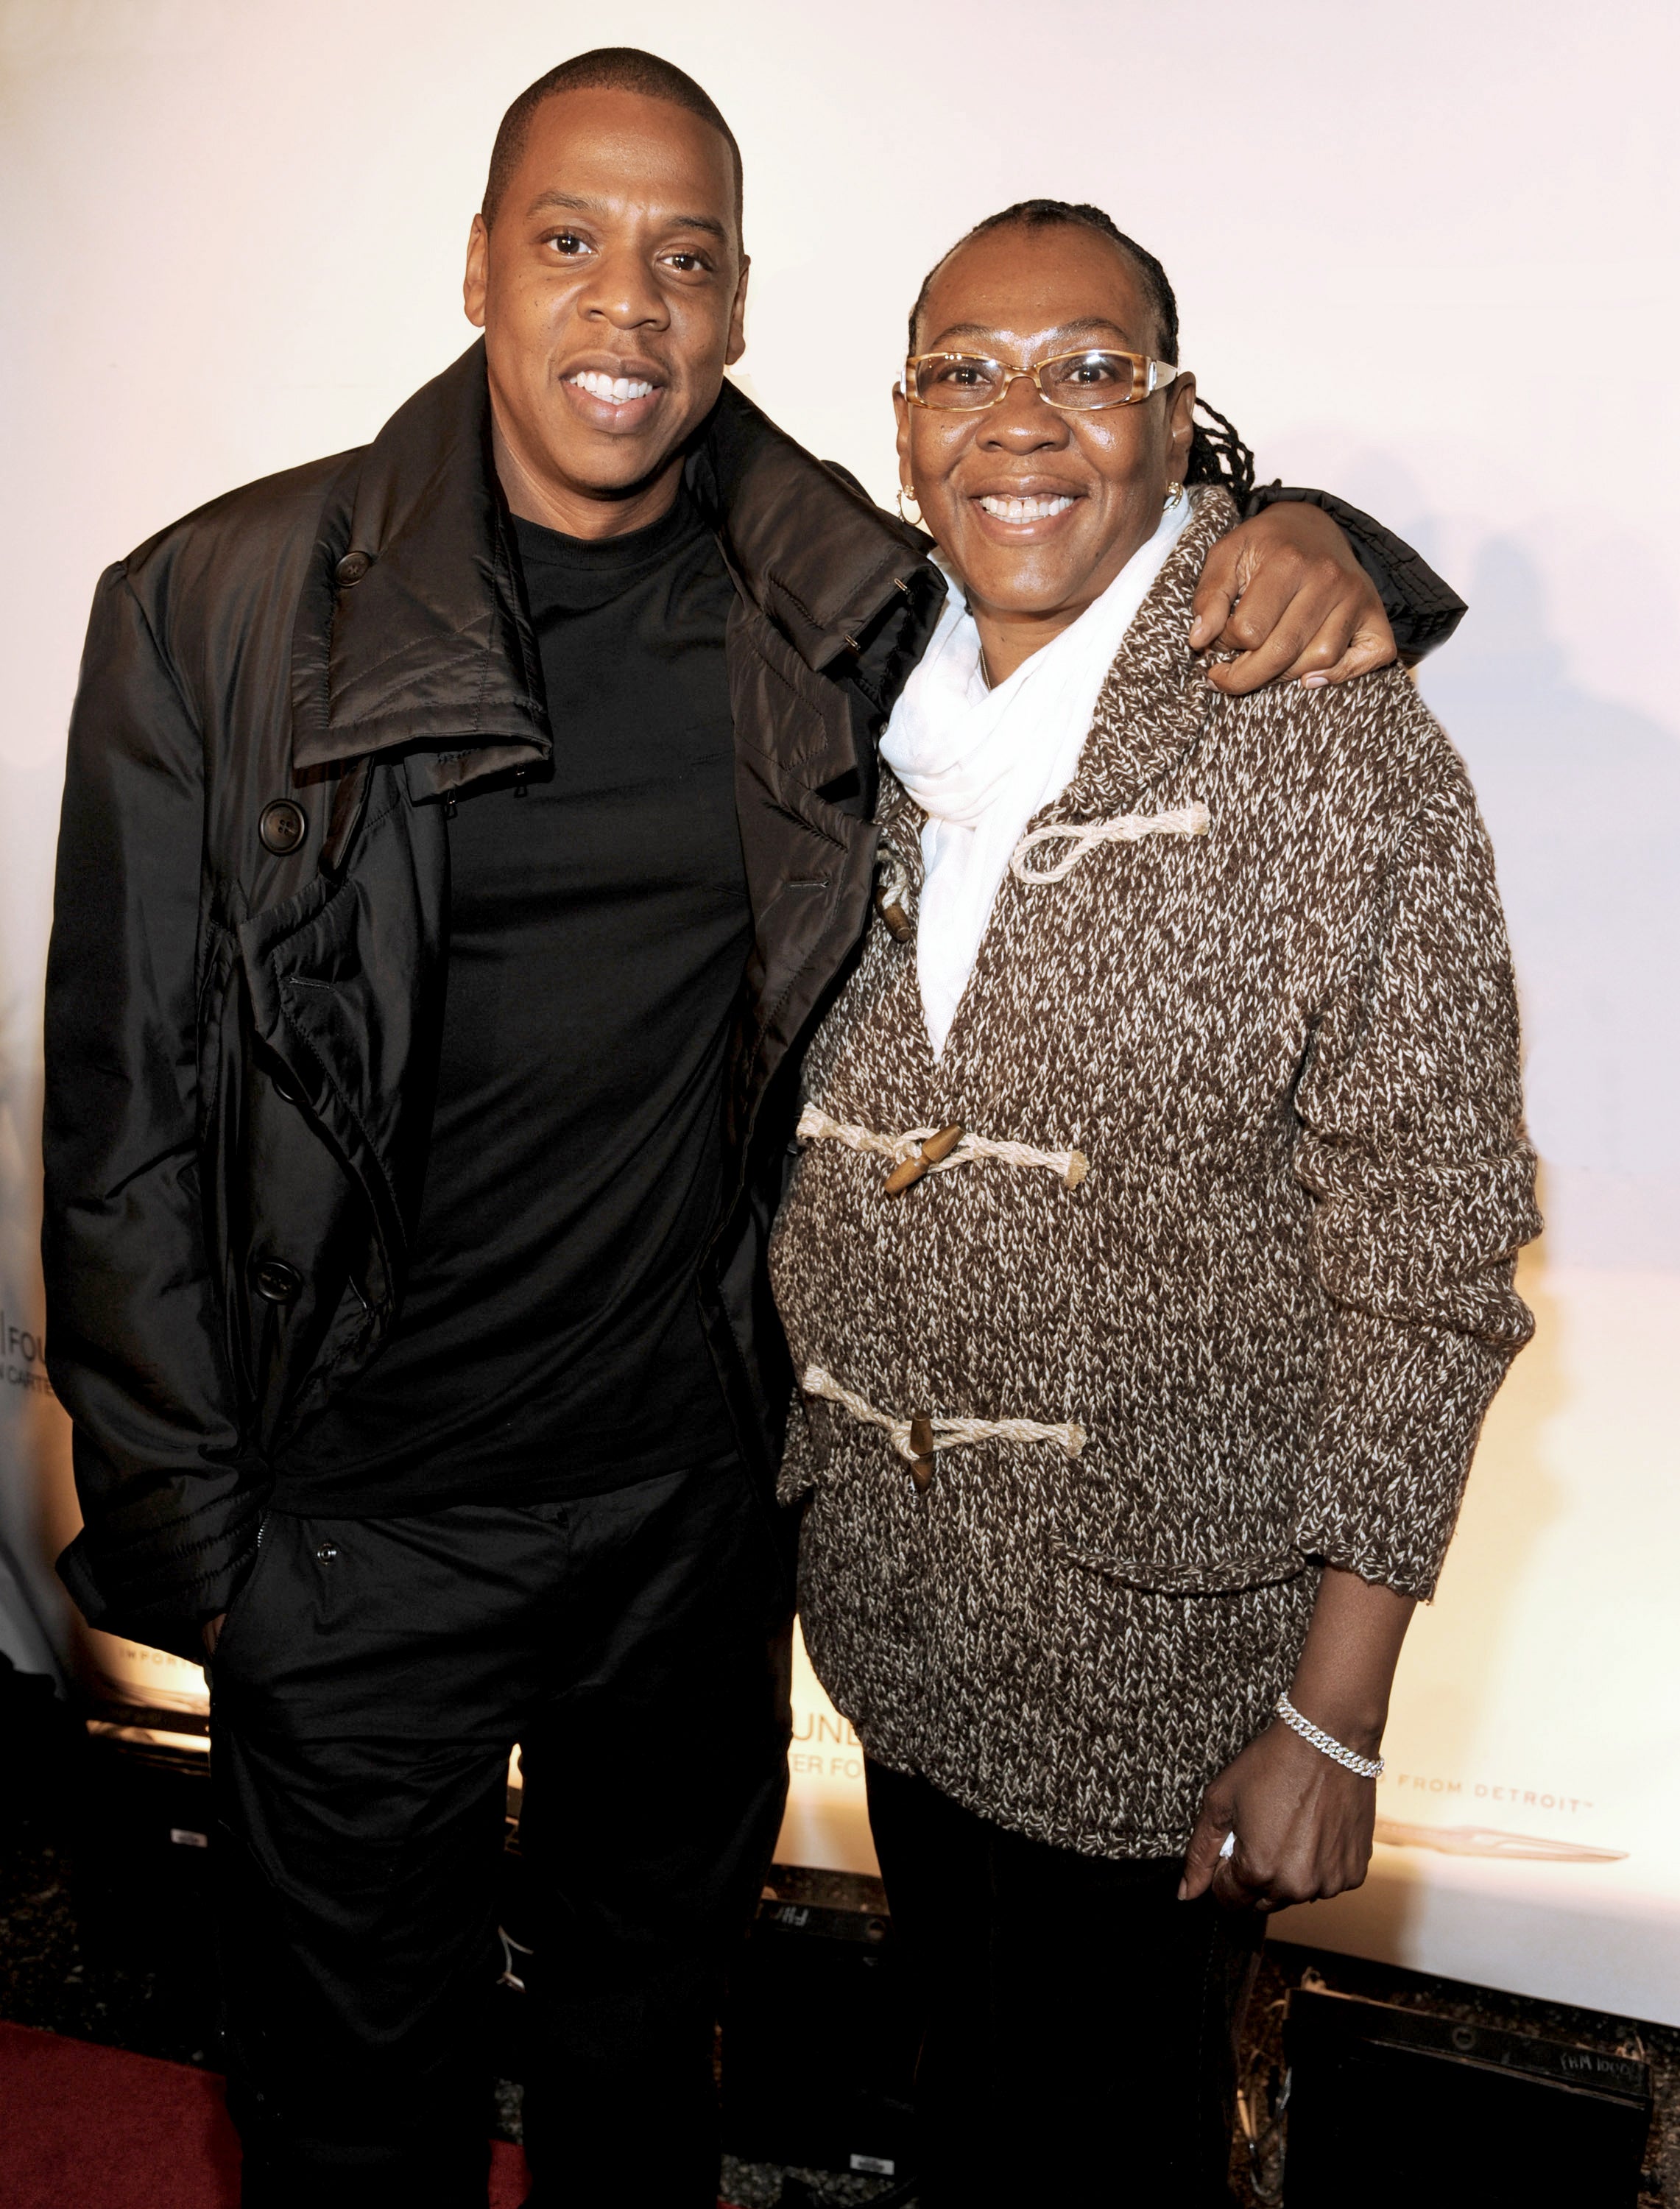 Jay Z's Mother Reveals The Rapper Comes From A Legacy Of HBCU Graduates
